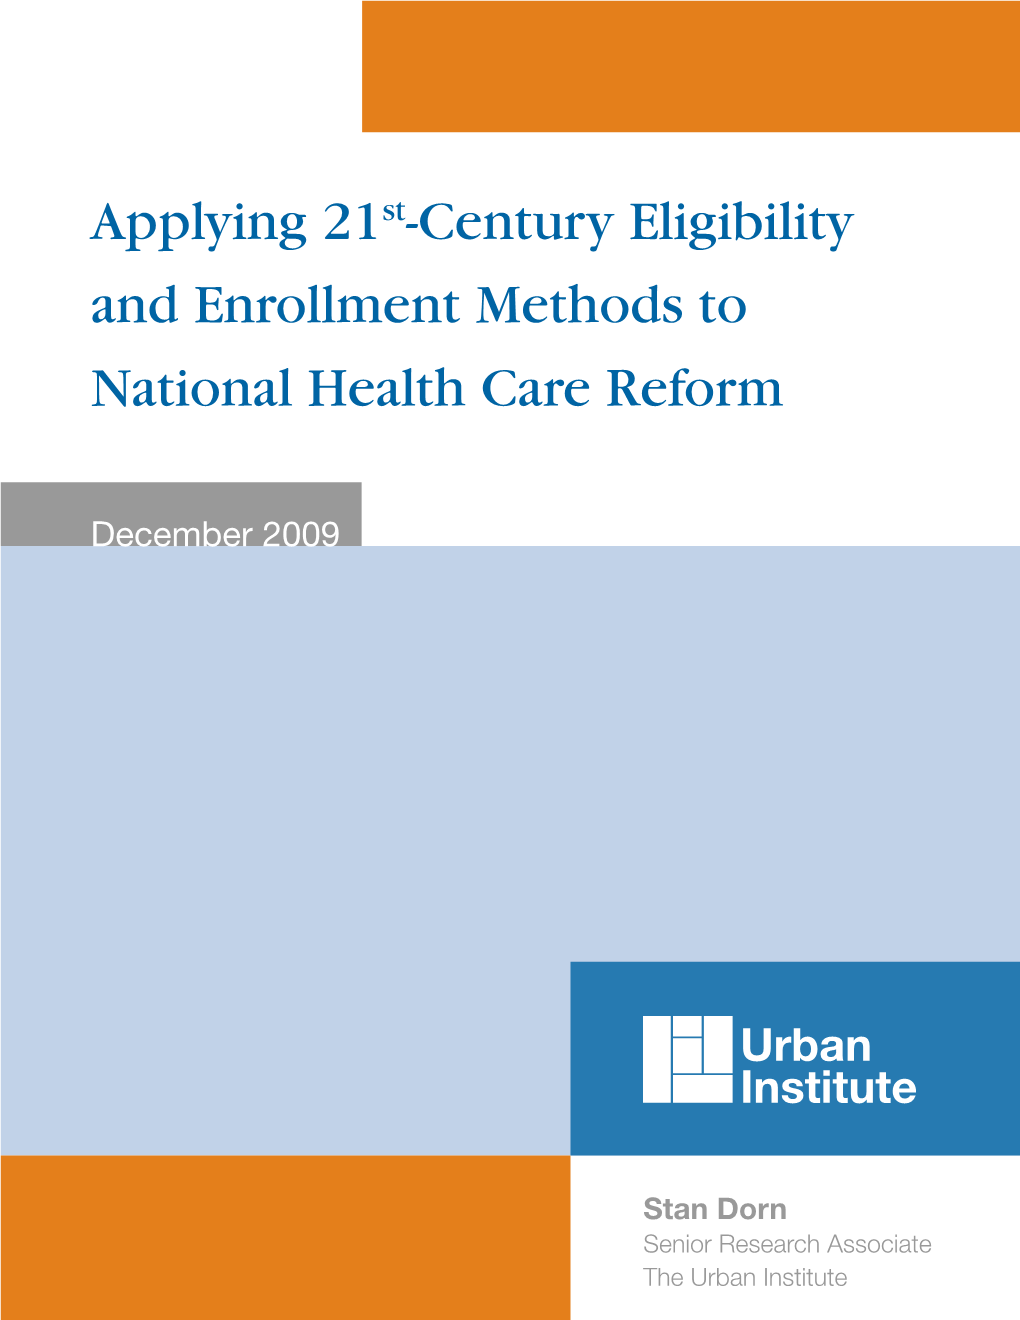 Applying 21St-Century Eligibility and Enrollment Methods to National Health Care Reform